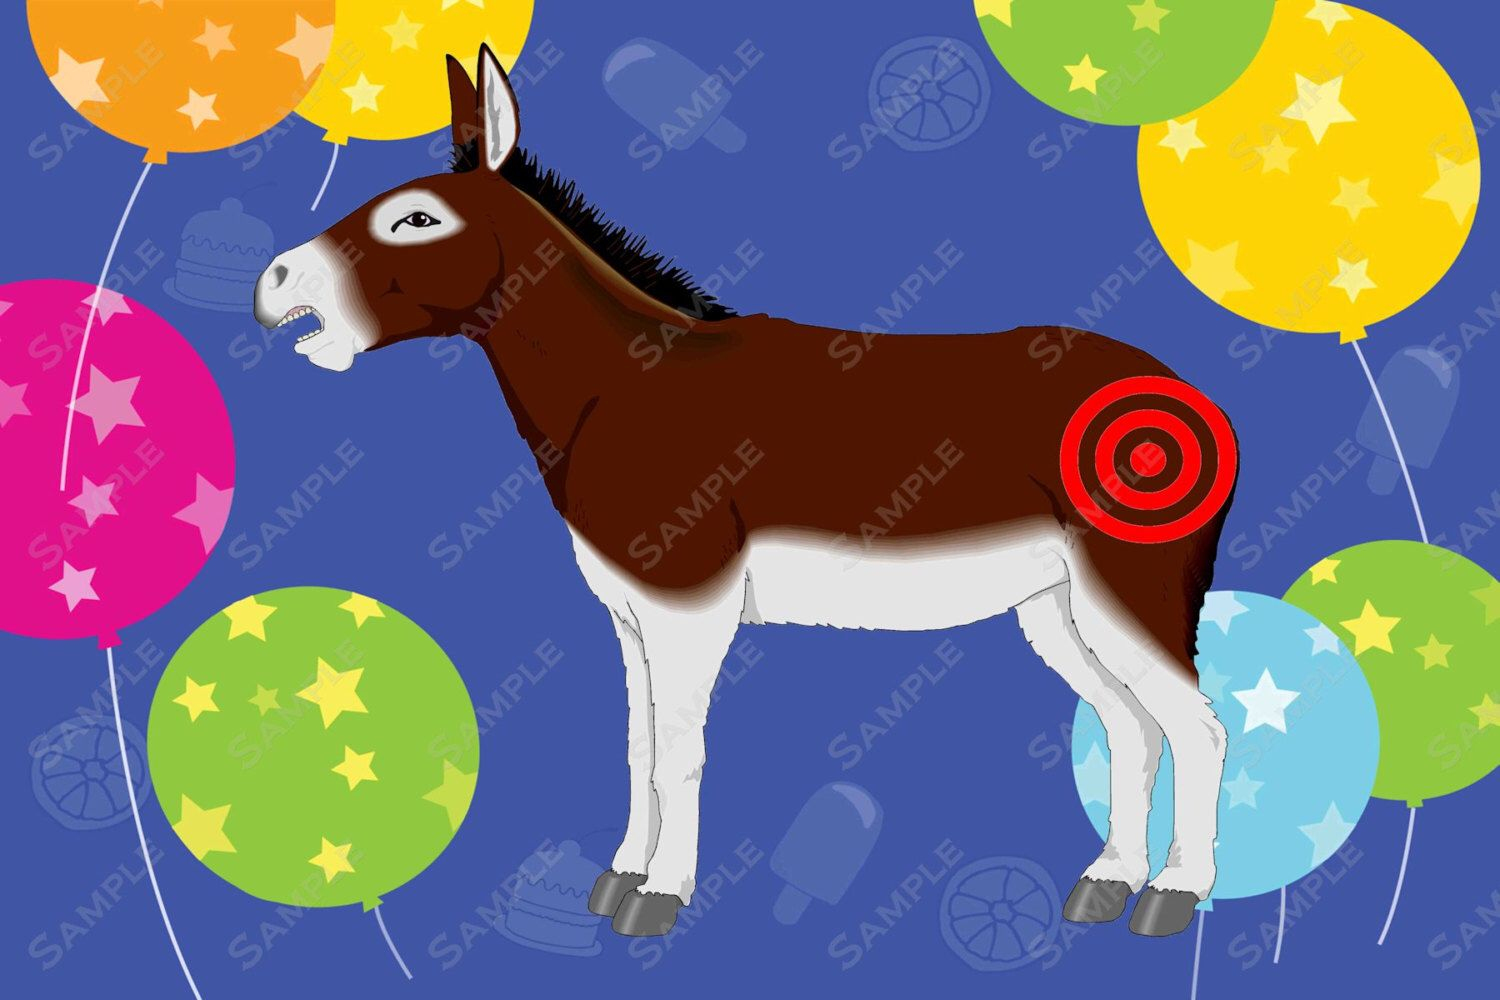 Fun Pin The Tail On The Donkey Printable 36 X 24 Inch JPG The Donkey 